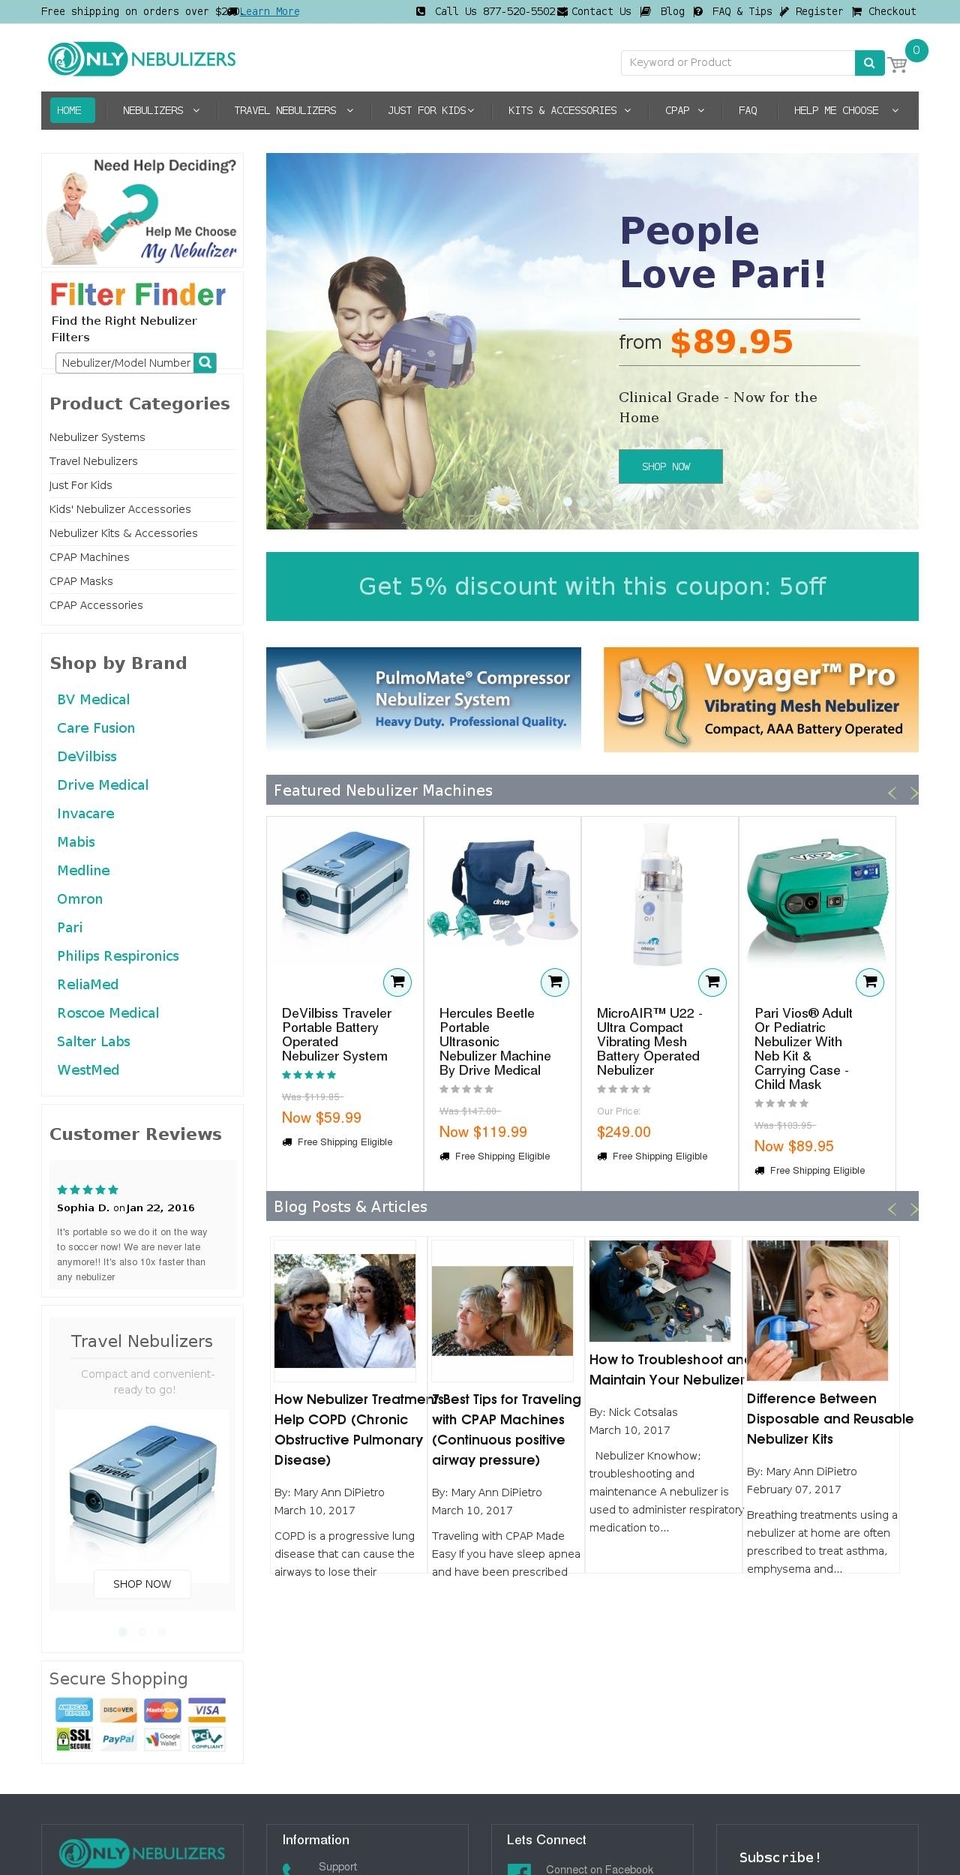 Origin Shopify theme site example onlynebulizers.com